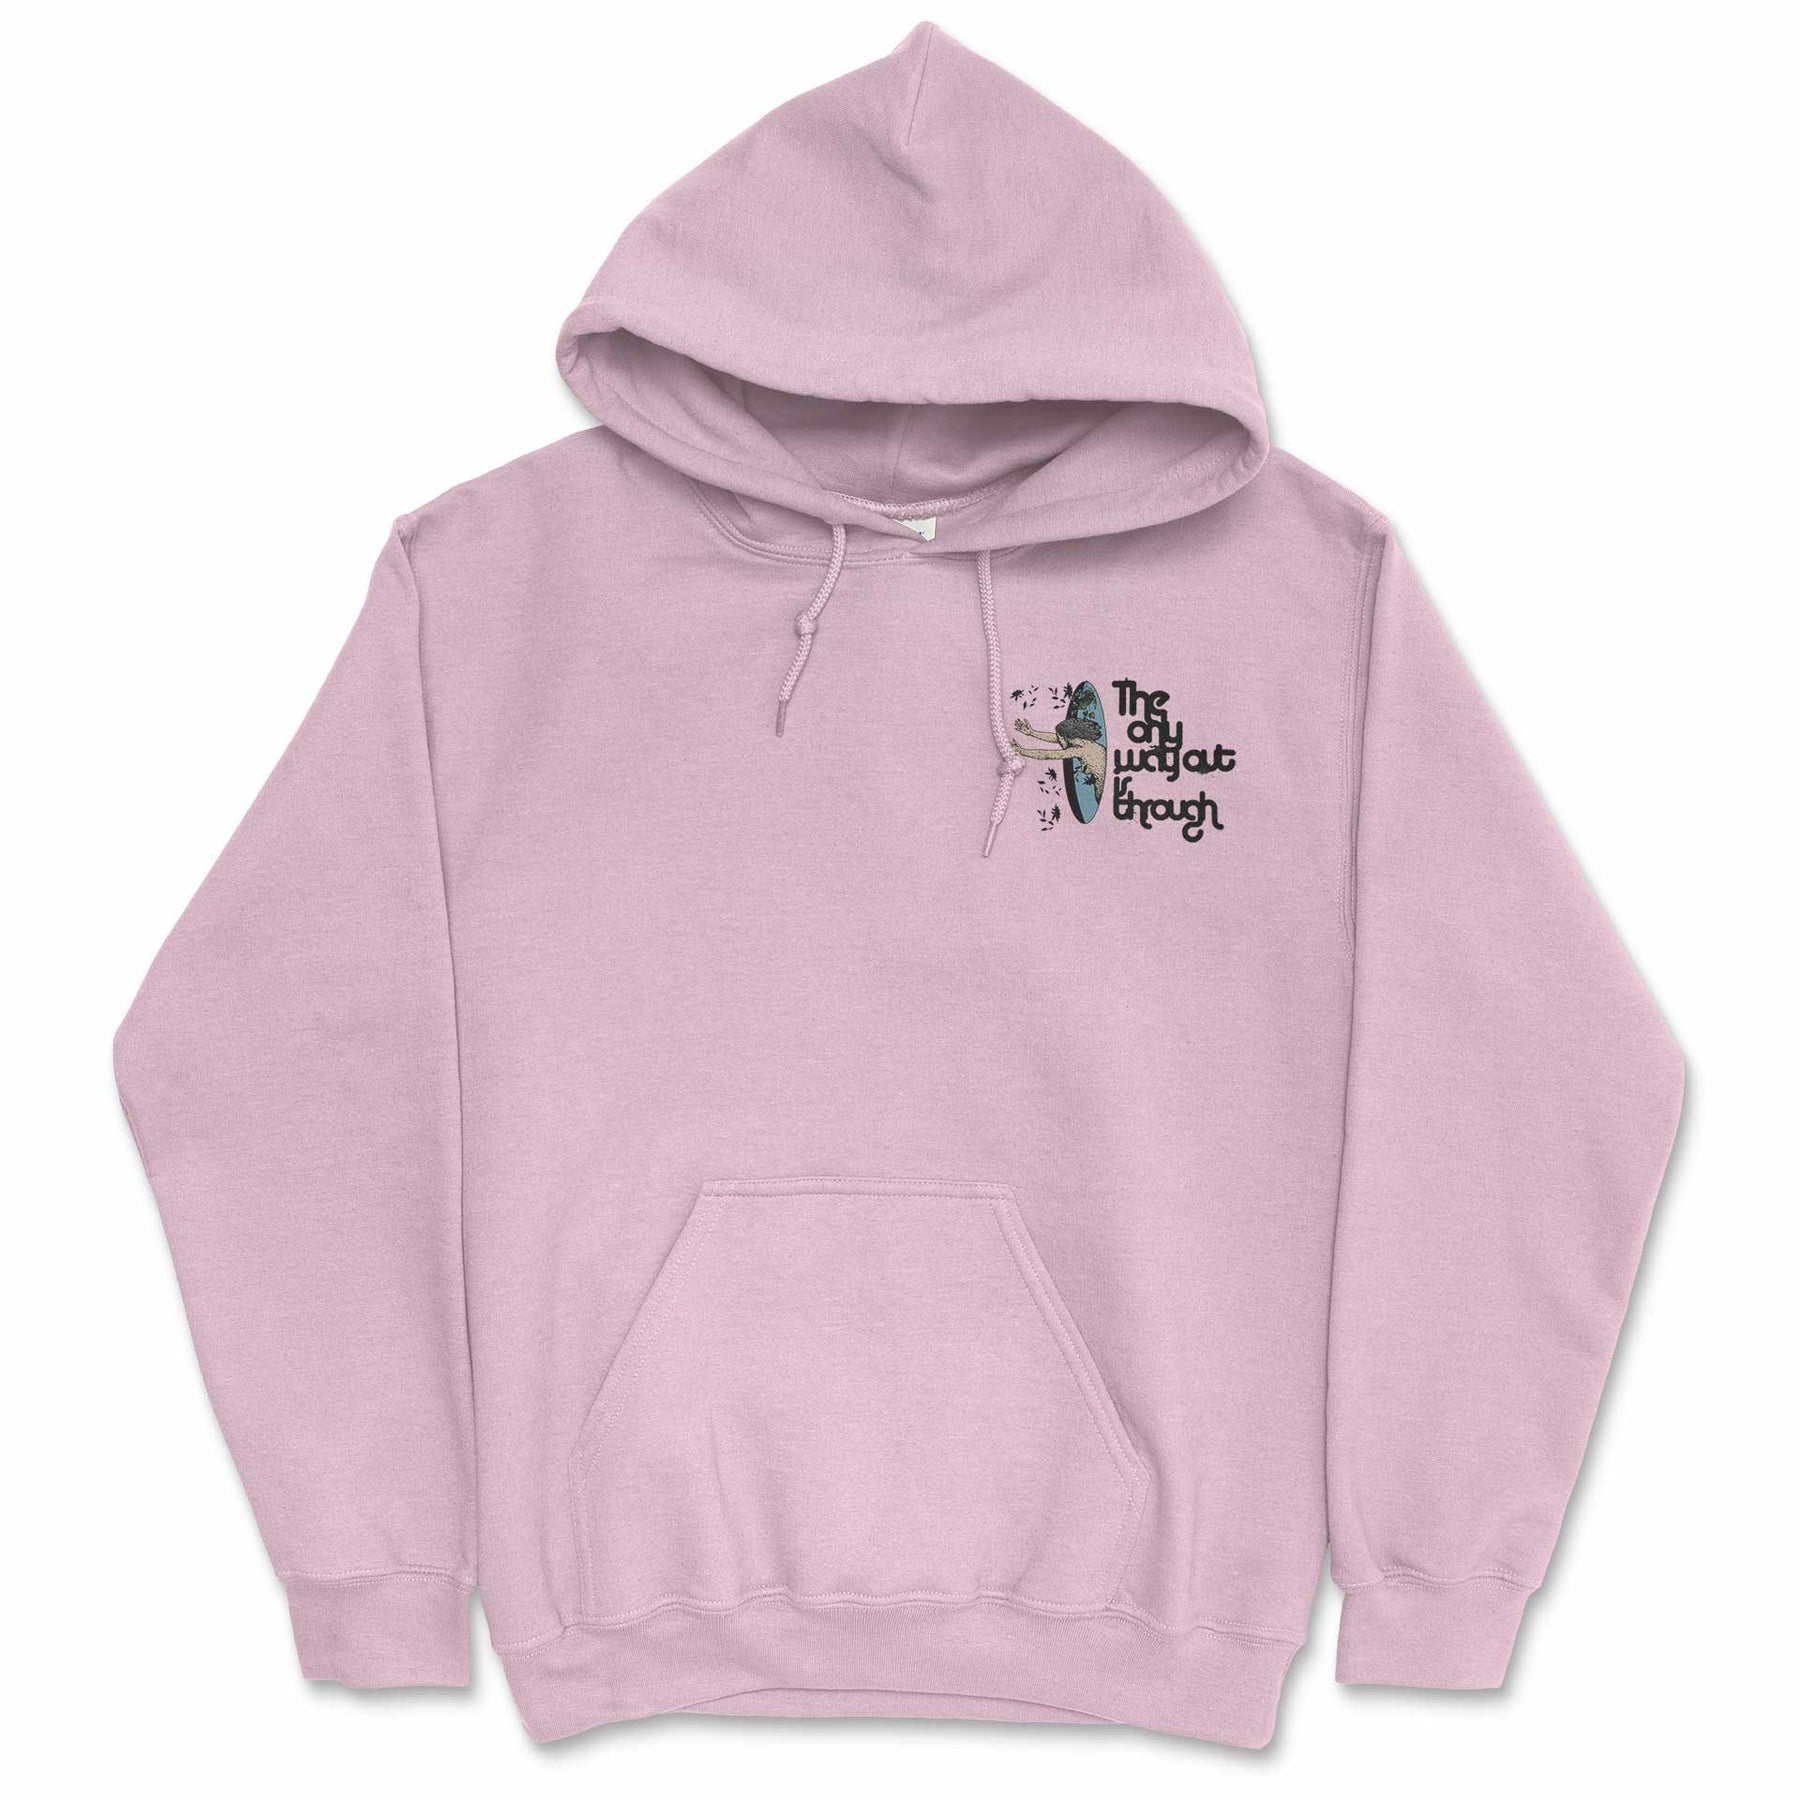 The Only Way Out Is Through Hoodie | Spiritual Streetwear Hoodies ...